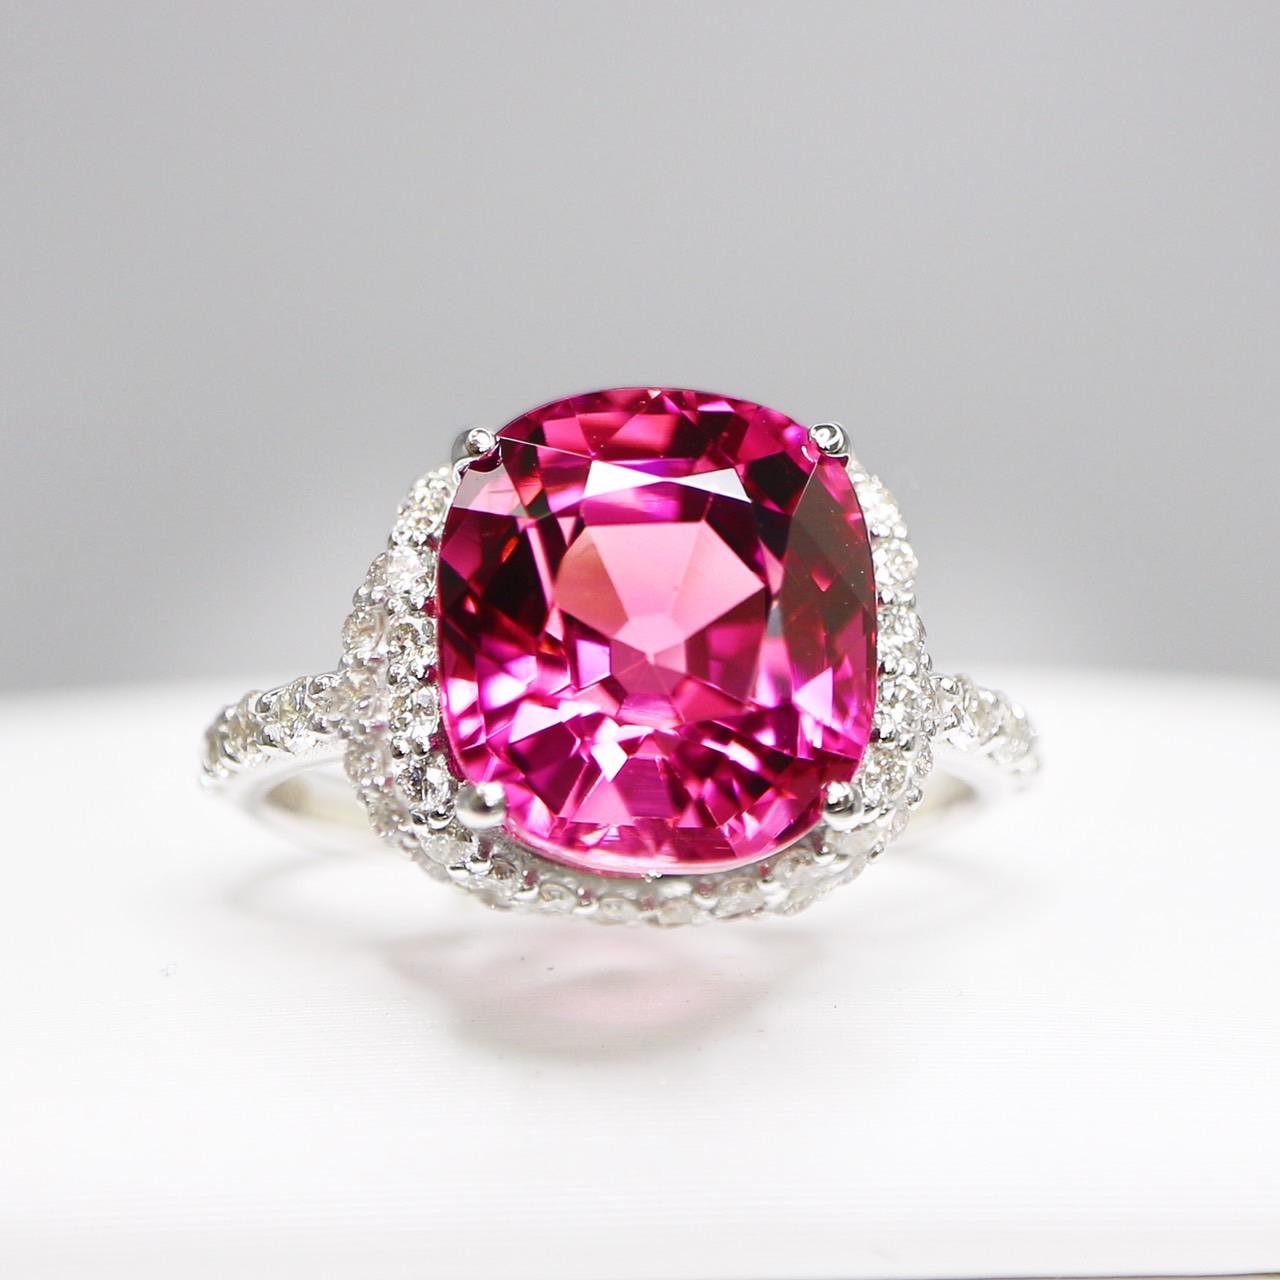 Women's *NRP* GIA 14K 4.90 Ct Top Pink Tourmaline Antique Art Deco Style Engagement Ring